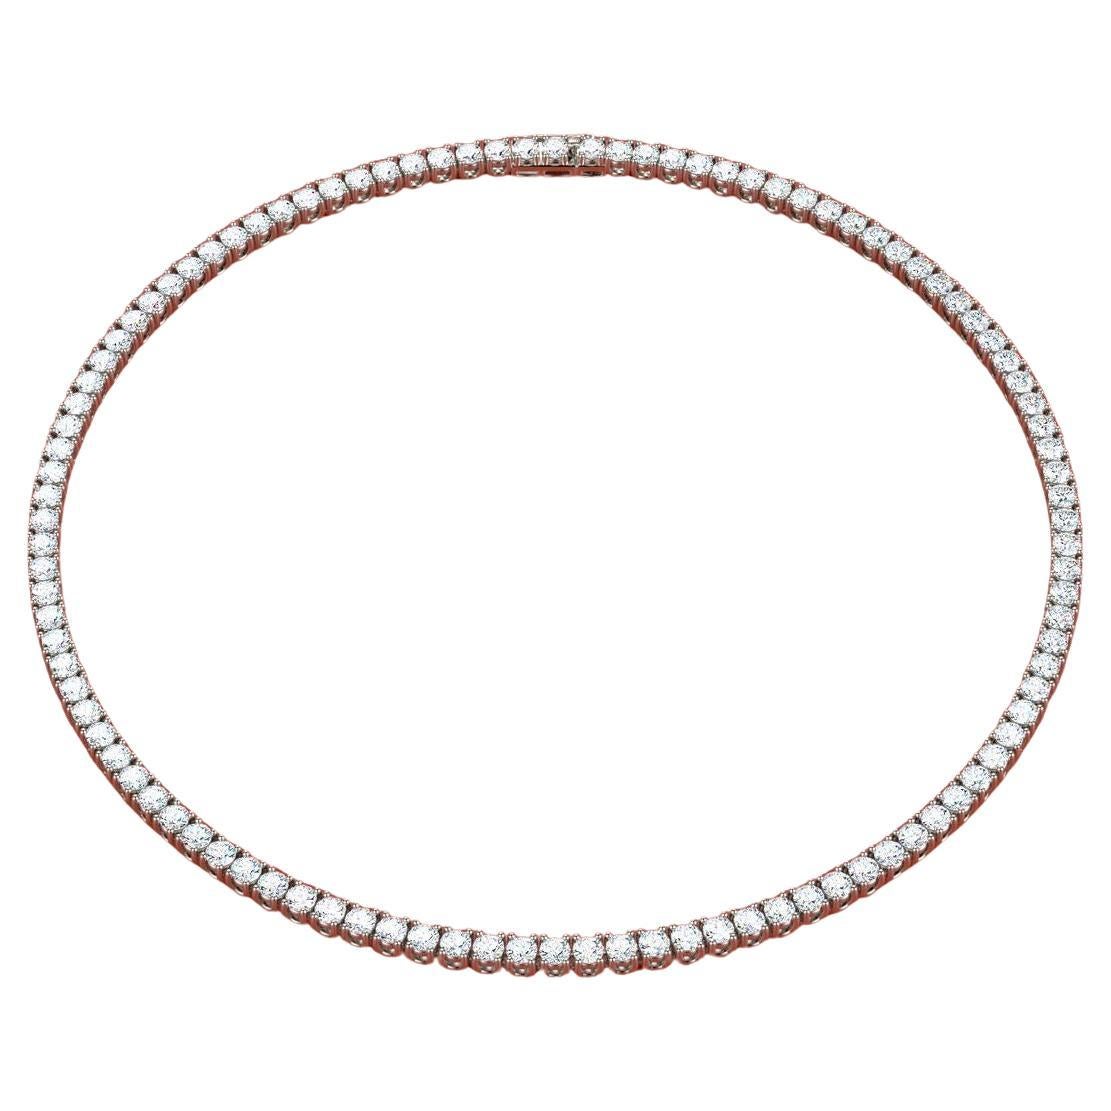 Presenting an exquisite Four-Prong 20 CT TW Natural Diamond Full Tennis Necklace, crafted to adorn the neckline with timeless elegance and sophistication.

Fashioned from luminous 18K white gold, this necklace features a stunning array of